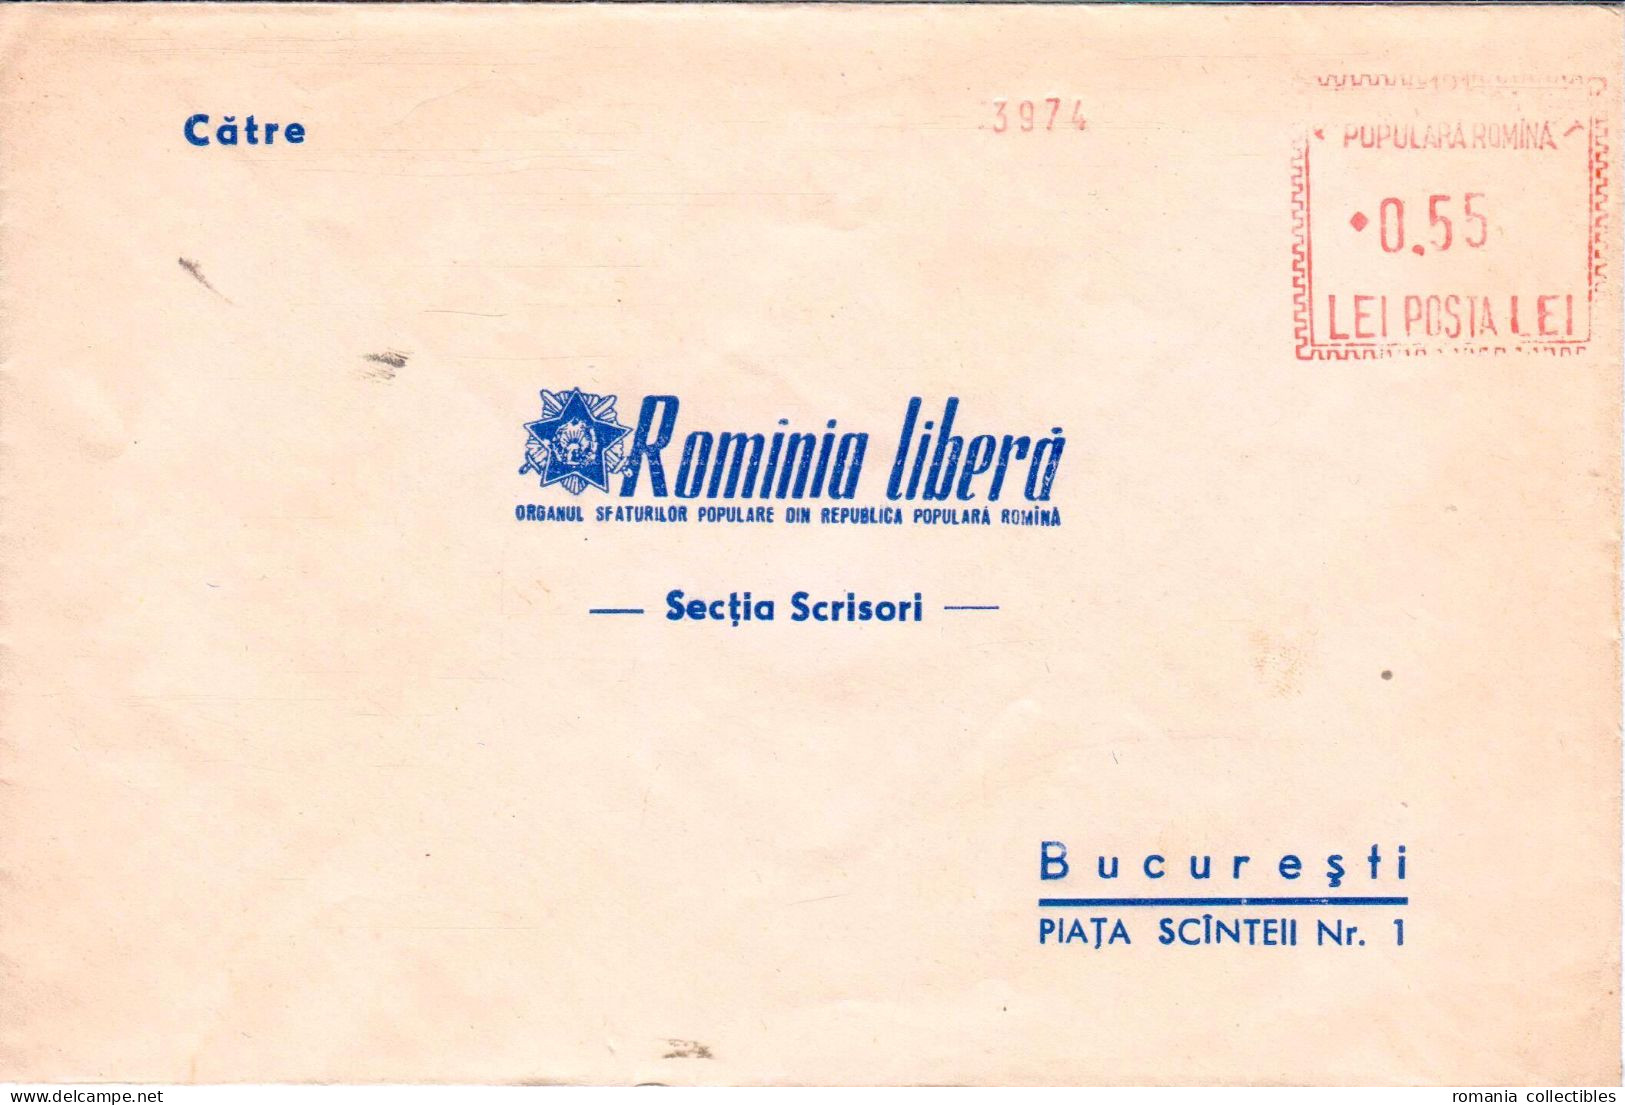 Romania, 1980's, Vintage Uncirculated Postal Cover  - "Romania Libera" Newspaper Advertising - Officials